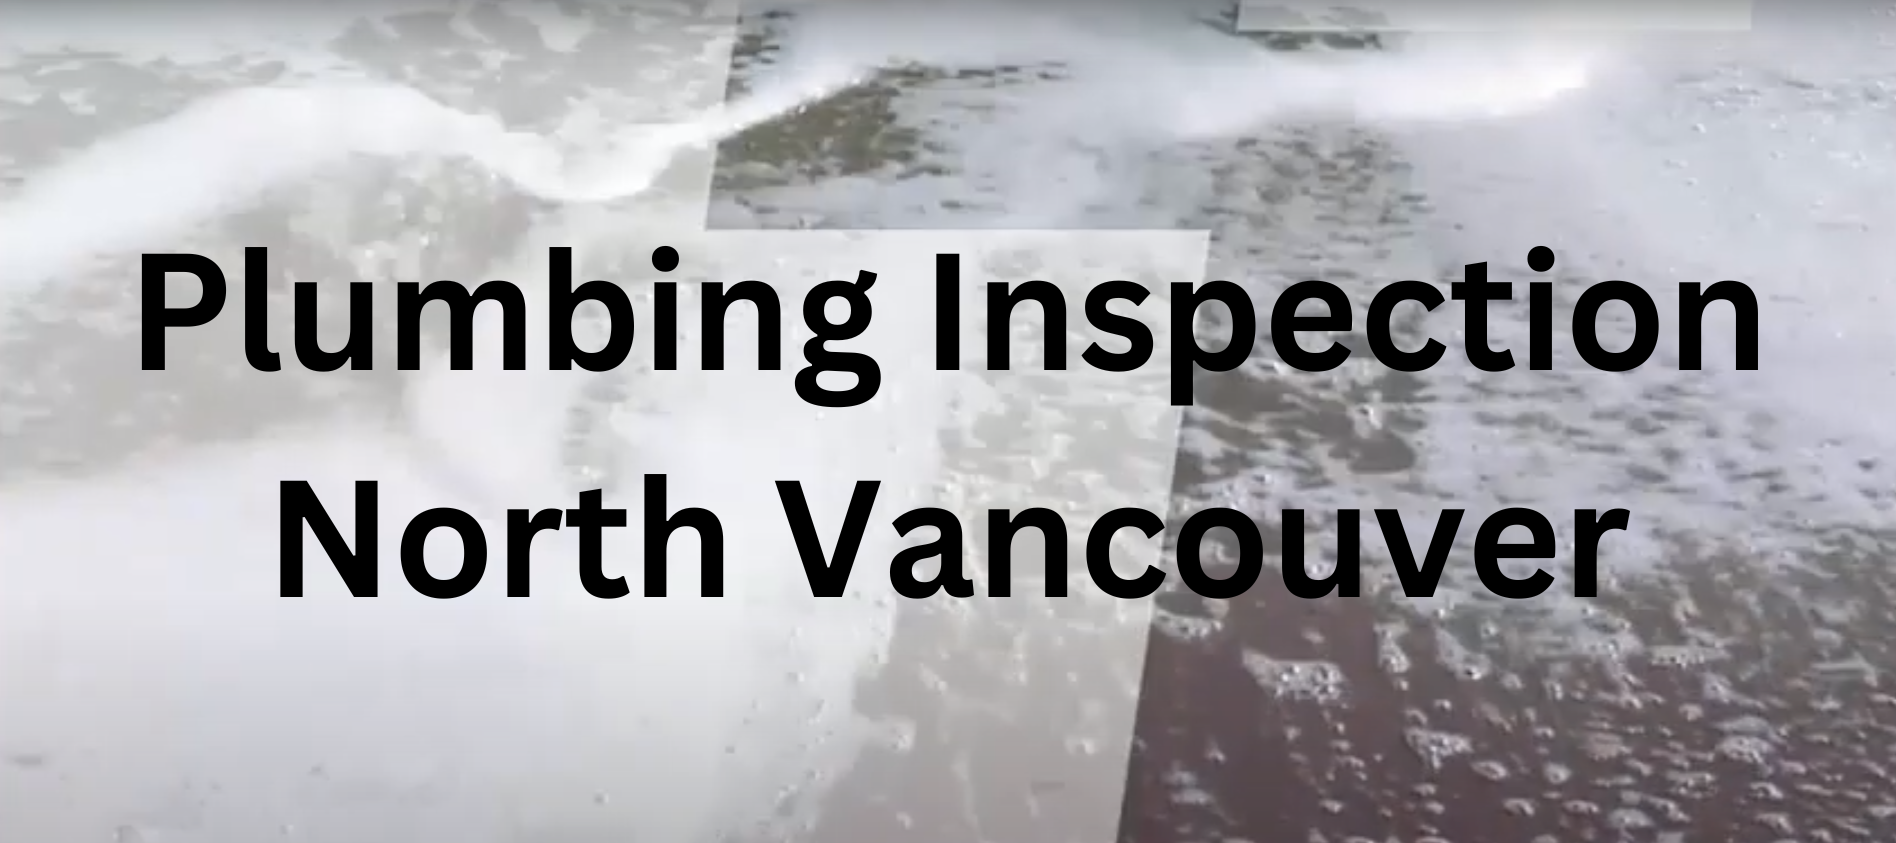 Plumbing Inspection North Vancouver